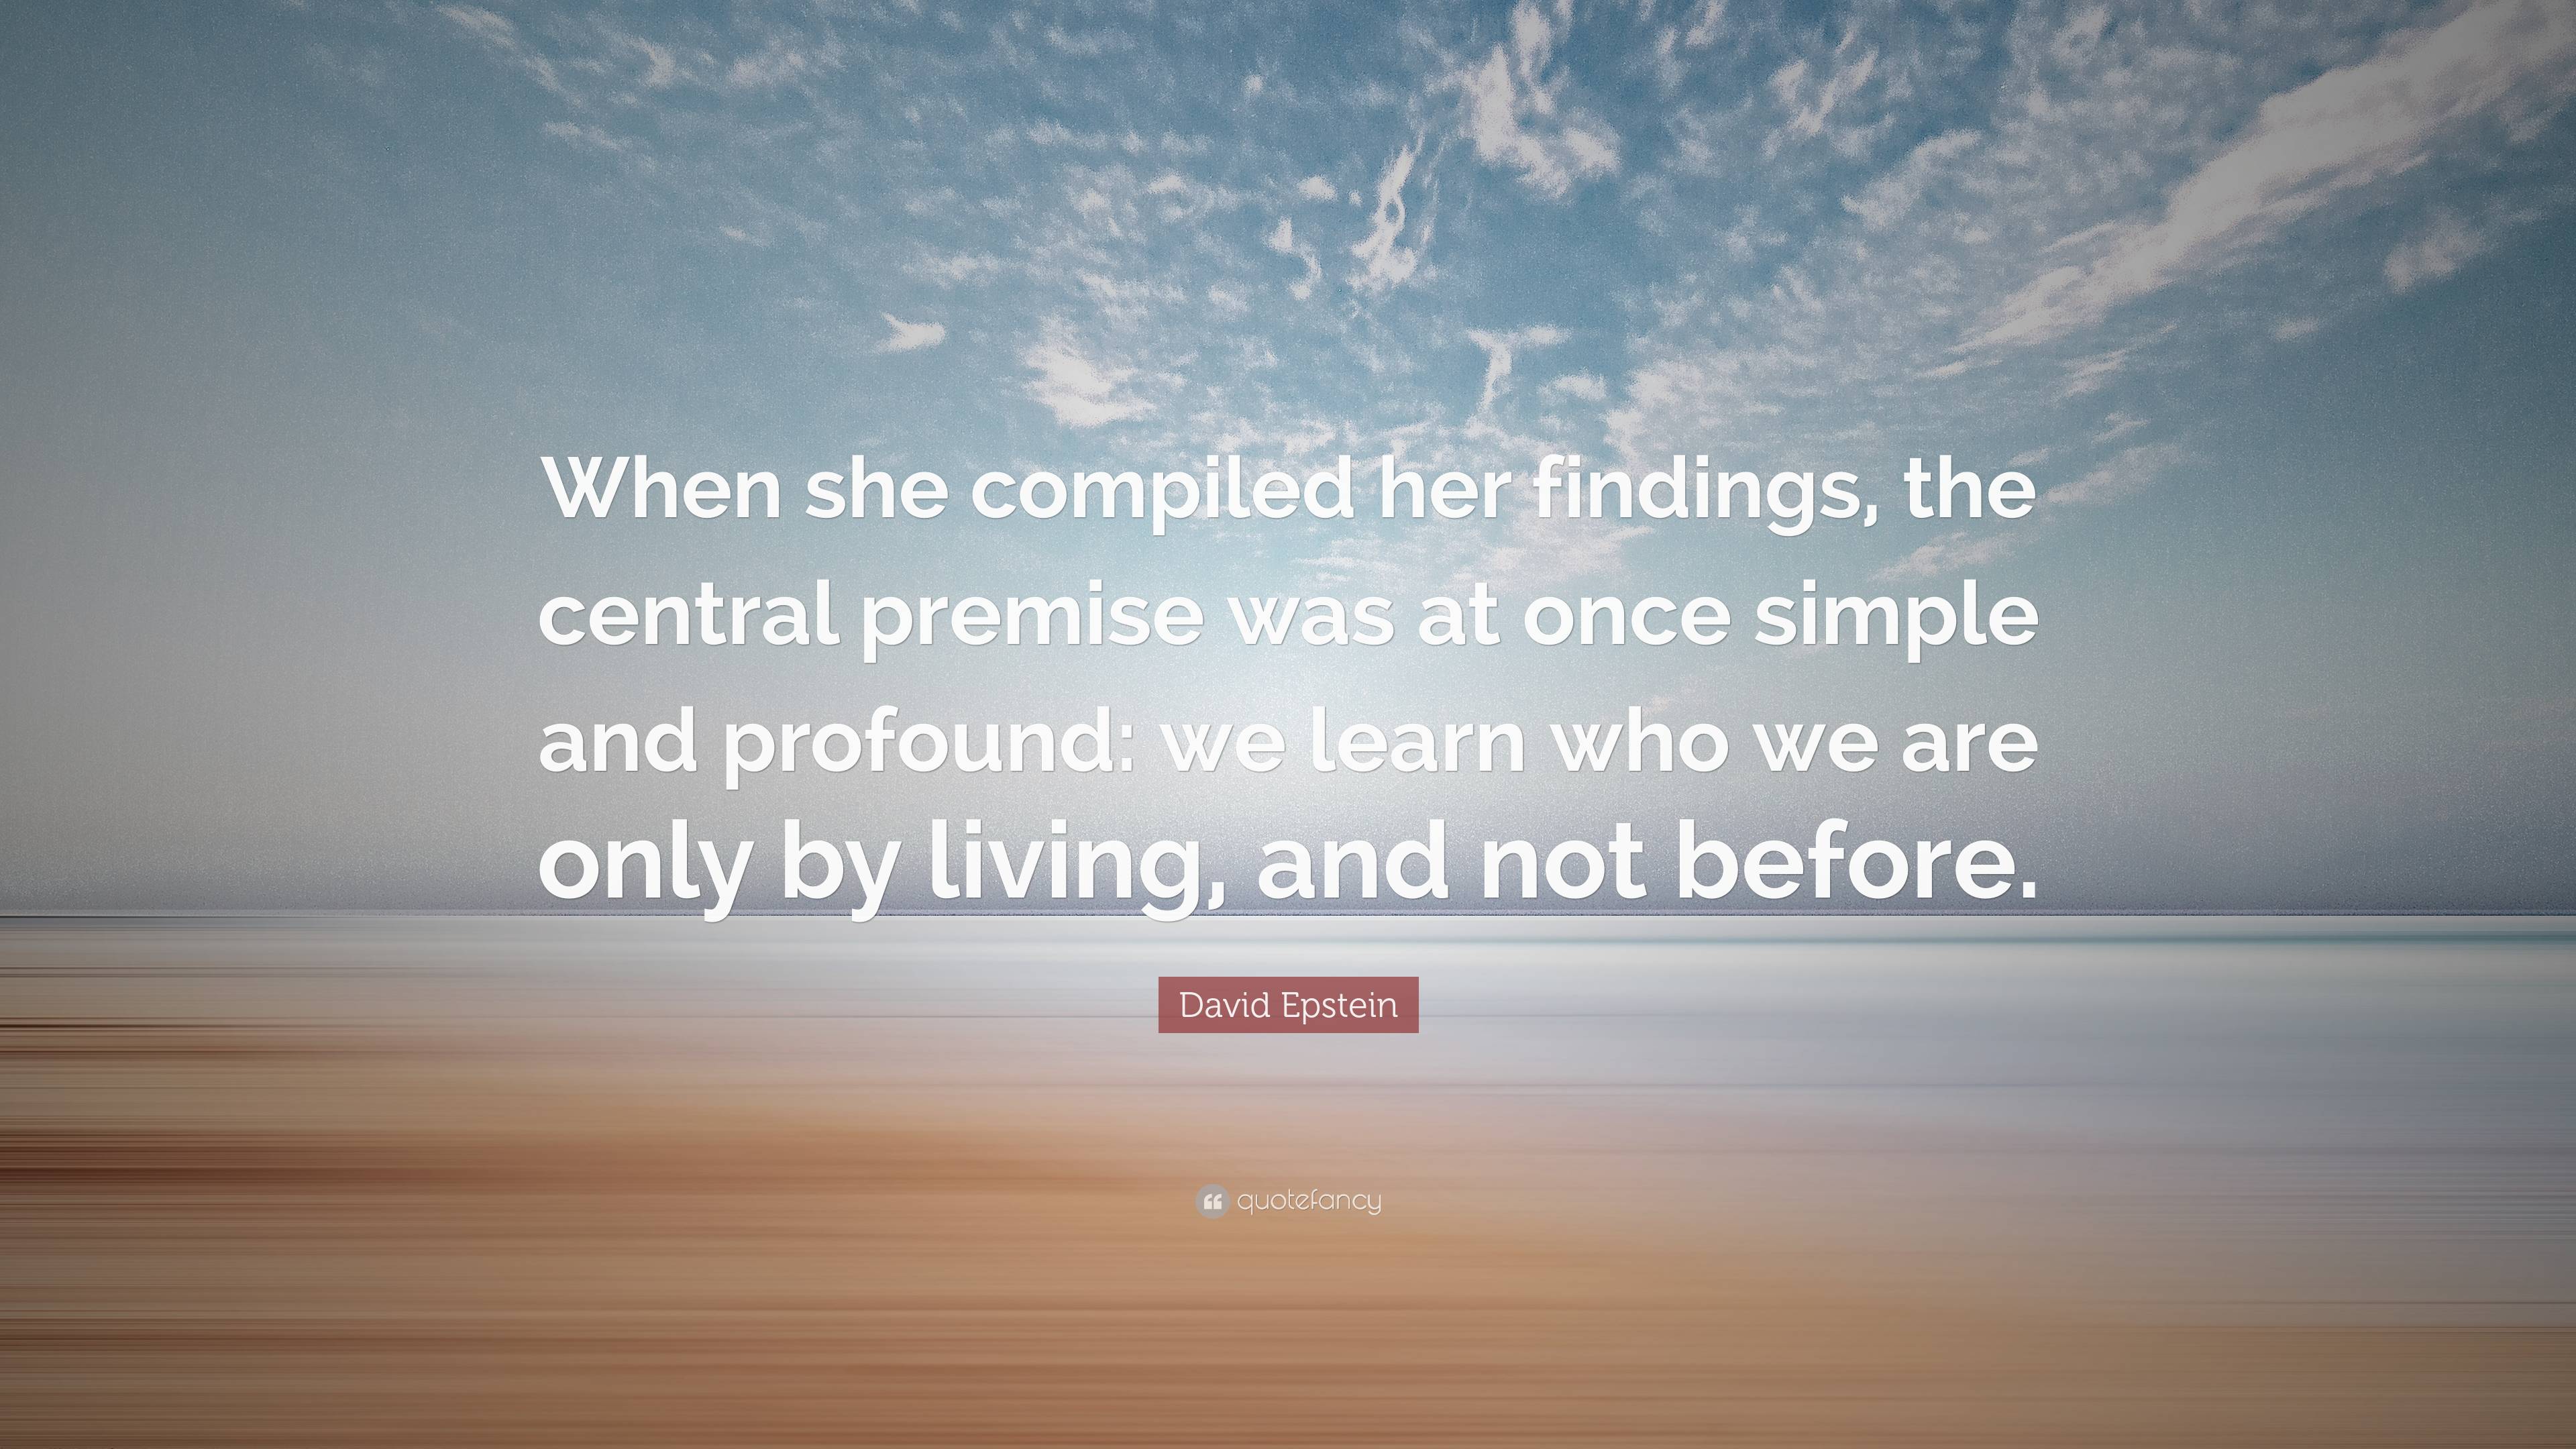 David Epstein Quote: “When she compiled her findings, the central ...